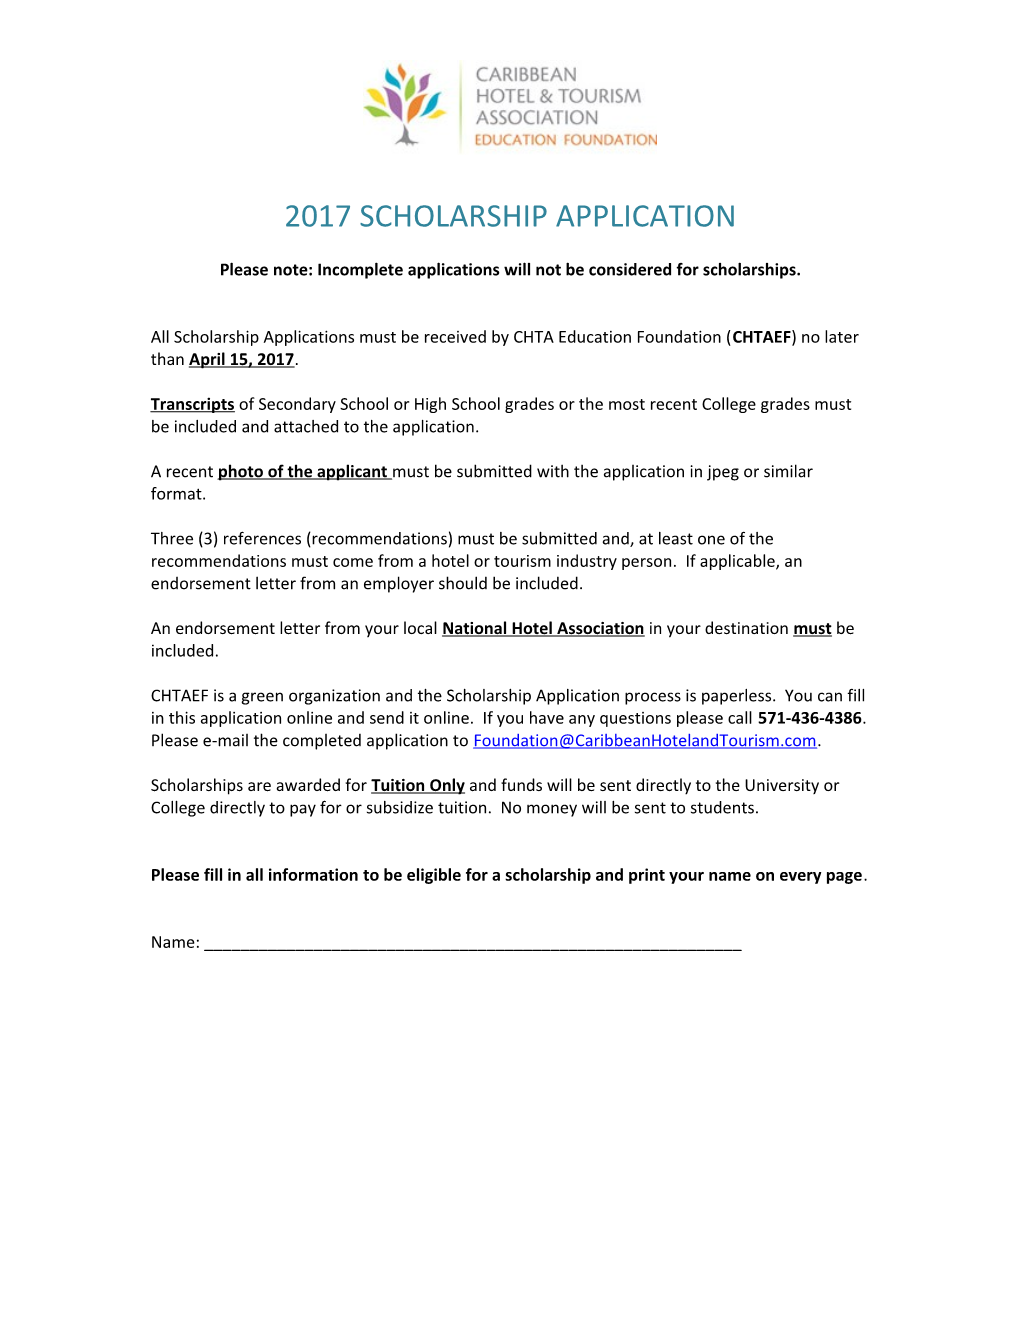 CHTAEF SCHOLARSHIP APPLICATION Page 1